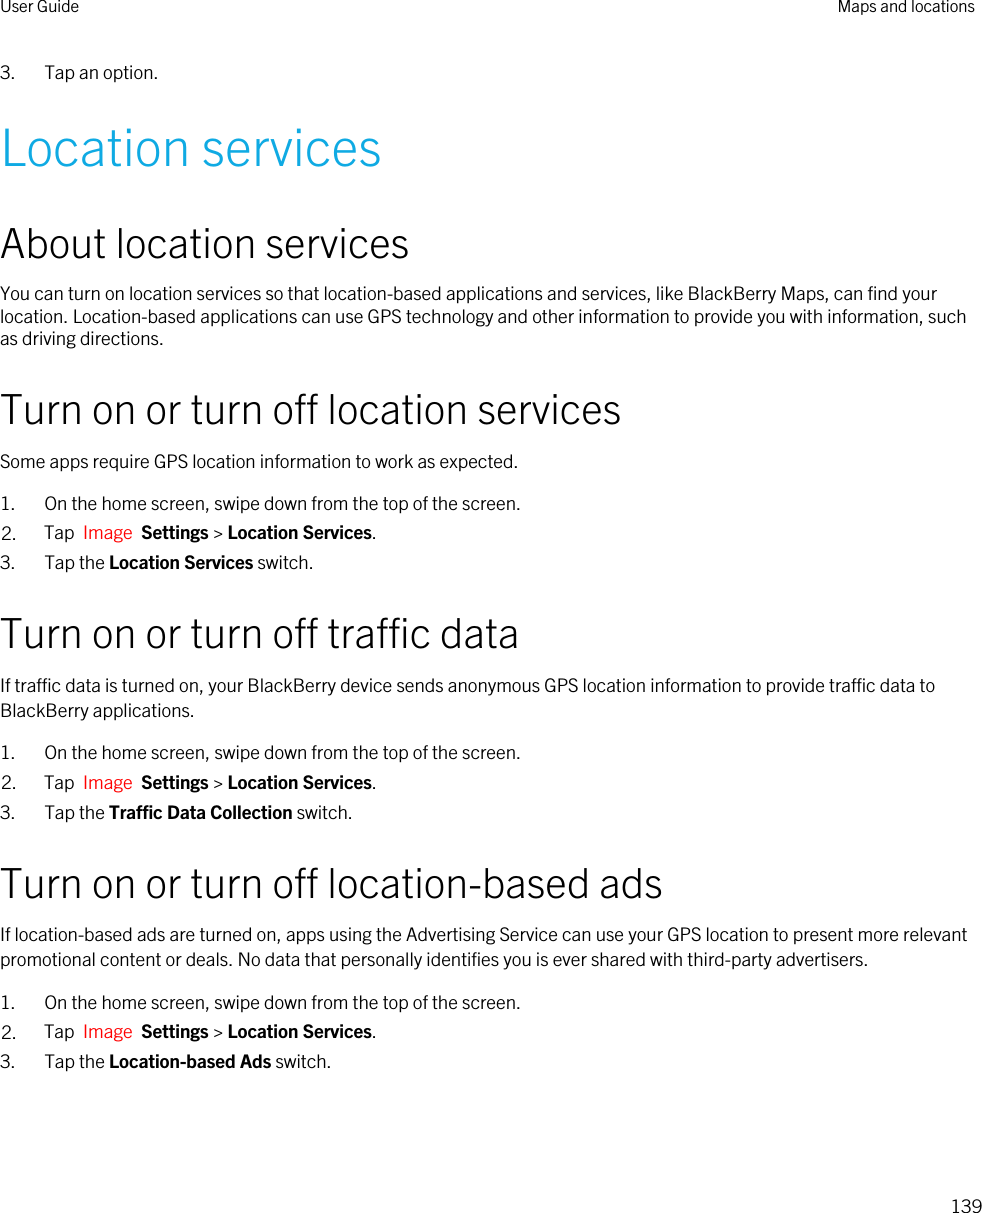 3. Tap an option.Location servicesAbout location servicesYou can turn on location services so that location-based applications and services, like BlackBerry Maps, can find your location. Location-based applications can use GPS technology and other information to provide you with information, such as driving directions.Turn on or turn off location servicesSome apps require GPS location information to work as expected.1. On the home screen, swipe down from the top of the screen.2. Tap  Image  Settings &gt; Location Services.3. Tap the Location Services switch.Turn on or turn off traffic dataIf traffic data is turned on, your BlackBerry device sends anonymous GPS location information to provide traffic data to BlackBerry applications.1. On the home screen, swipe down from the top of the screen.2. Tap  Image  Settings &gt; Location Services.3. Tap the Traffic Data Collection switch.Turn on or turn off location-based adsIf location-based ads are turned on, apps using the Advertising Service can use your GPS location to present more relevant promotional content or deals. No data that personally identifies you is ever shared with third-party advertisers.1. On the home screen, swipe down from the top of the screen.2. Tap  Image  Settings &gt; Location Services.3. Tap the Location-based Ads switch.User Guide Maps and locations139